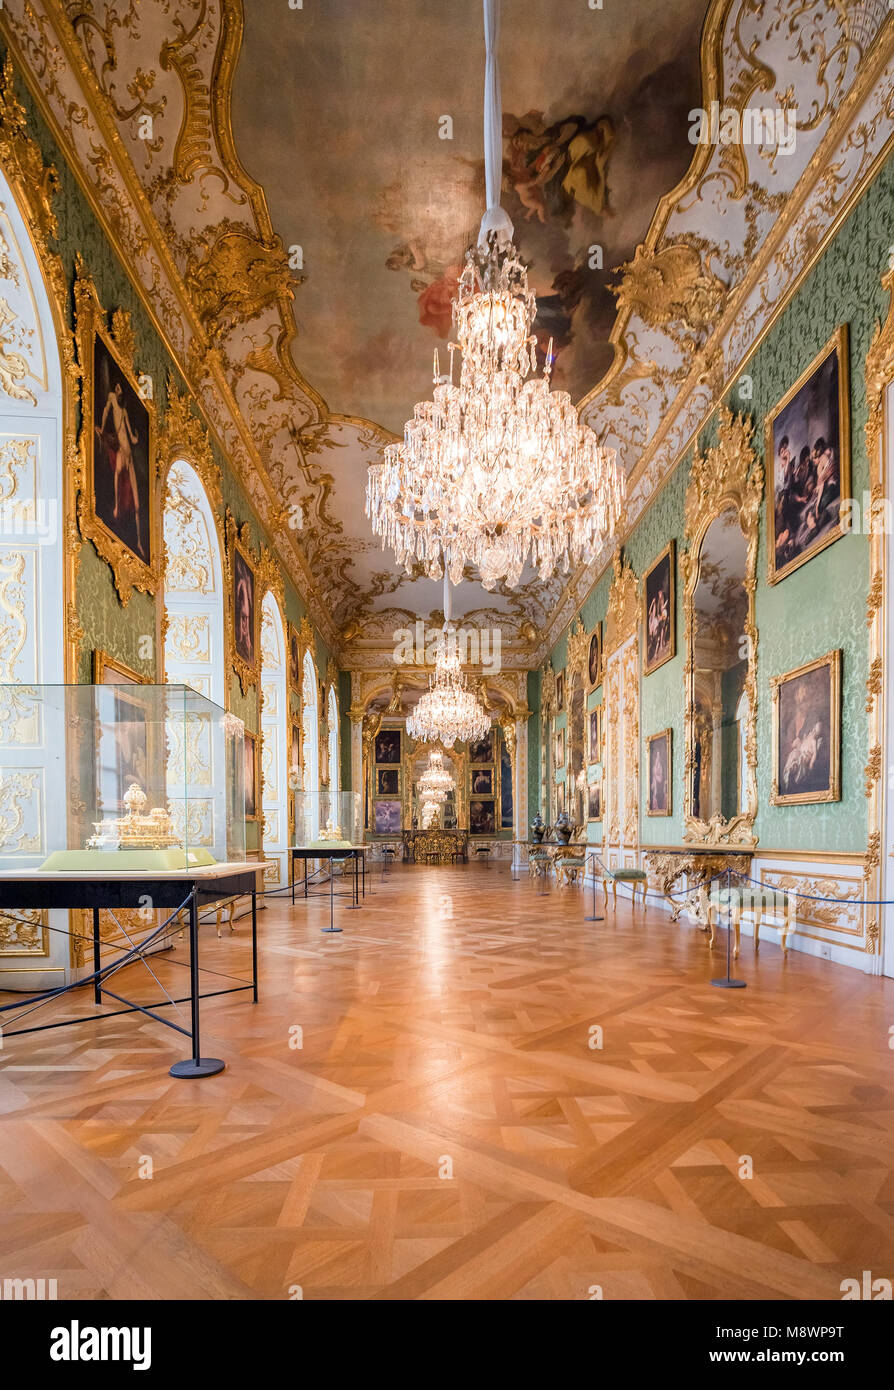 The Munich Residence served as the seat of government and residence of the Bavarian dukes, electors and kings from 1508 to 1918 Stock Photo